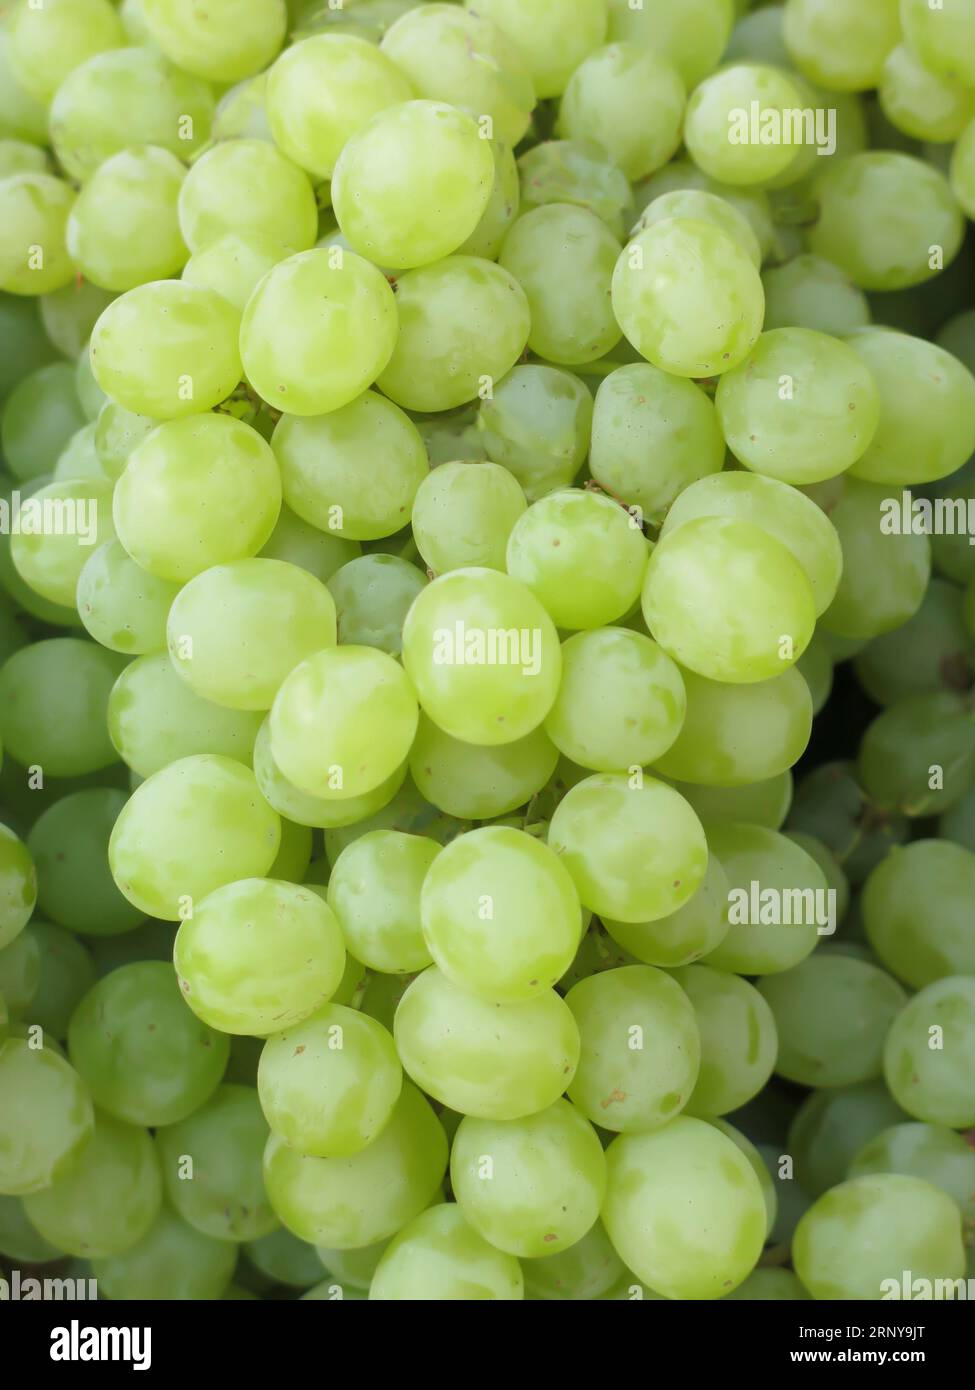 https://c8.alamy.com/comp/2RNY9JT/thompson-grapes-for-sale-at-local-farmers-market-2RNY9JT.jpg